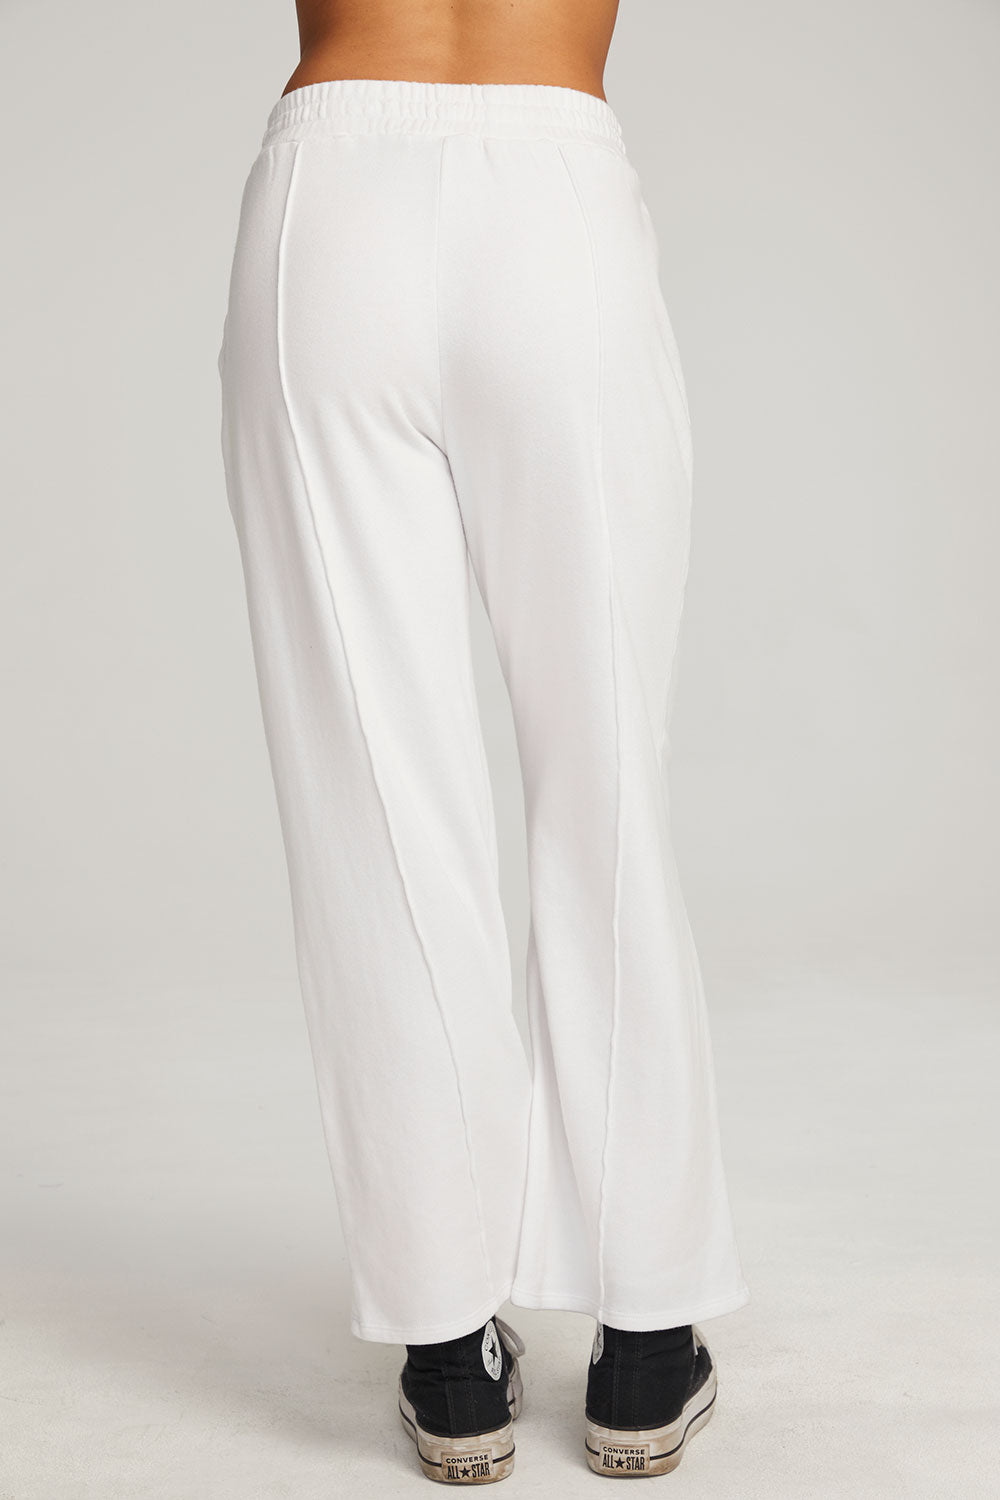 Amarillo White Trousers WOMENS chaserbrand